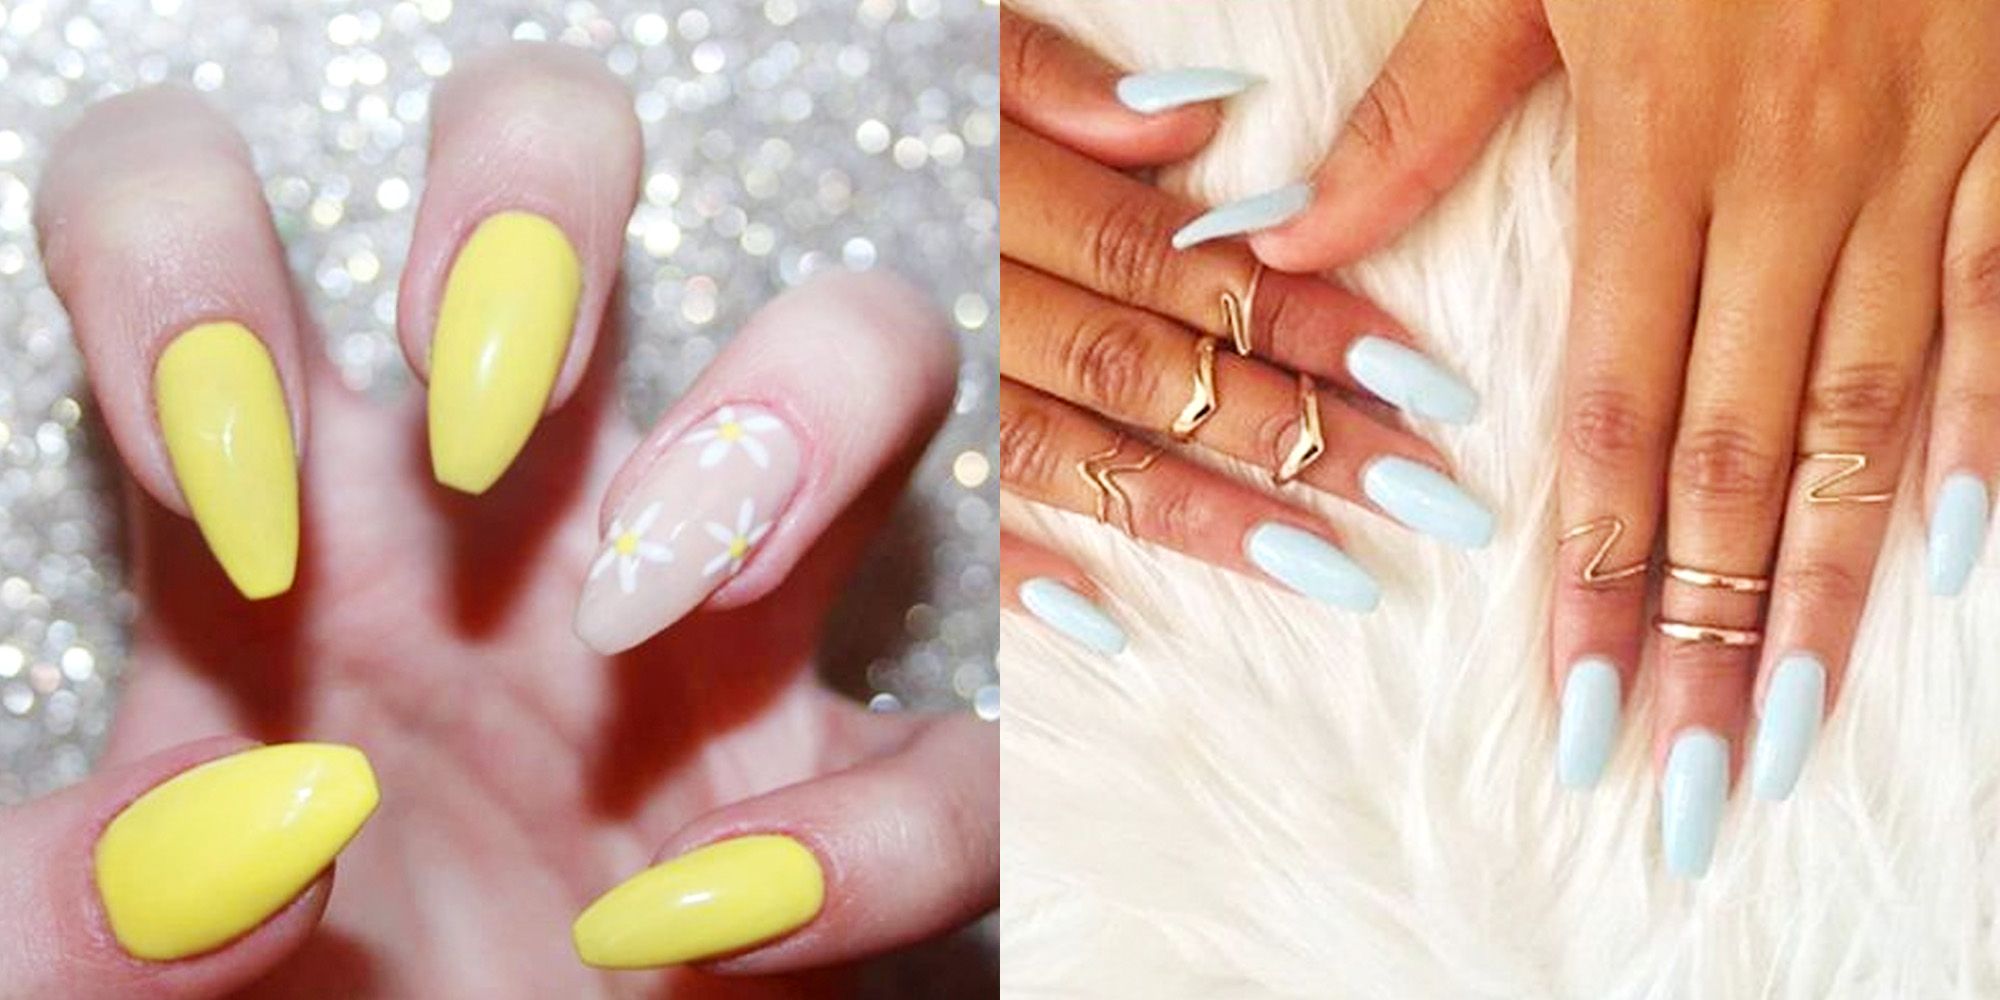 9 Different Nail Shapes and Names for Your Manicure - Types of Nail Shapes